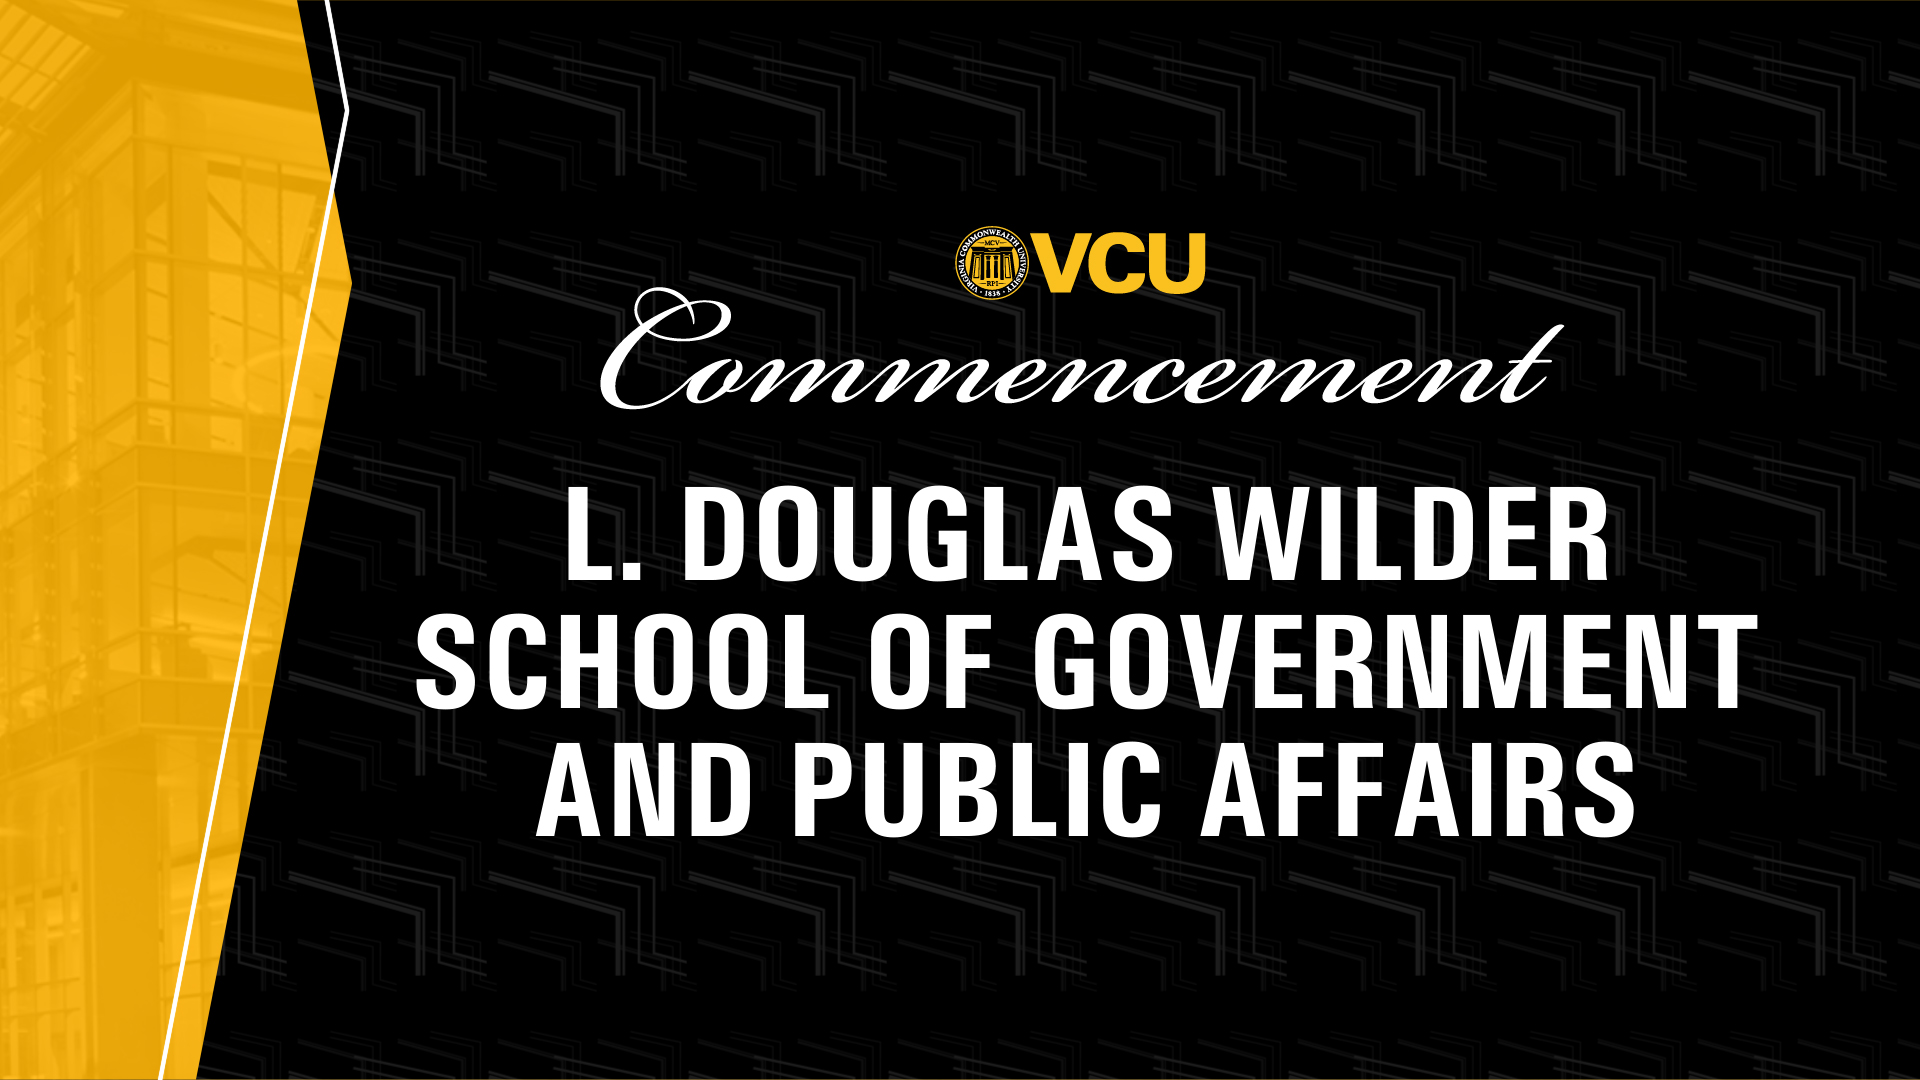 L. Douglas Wilder School of Government and Public Affairs